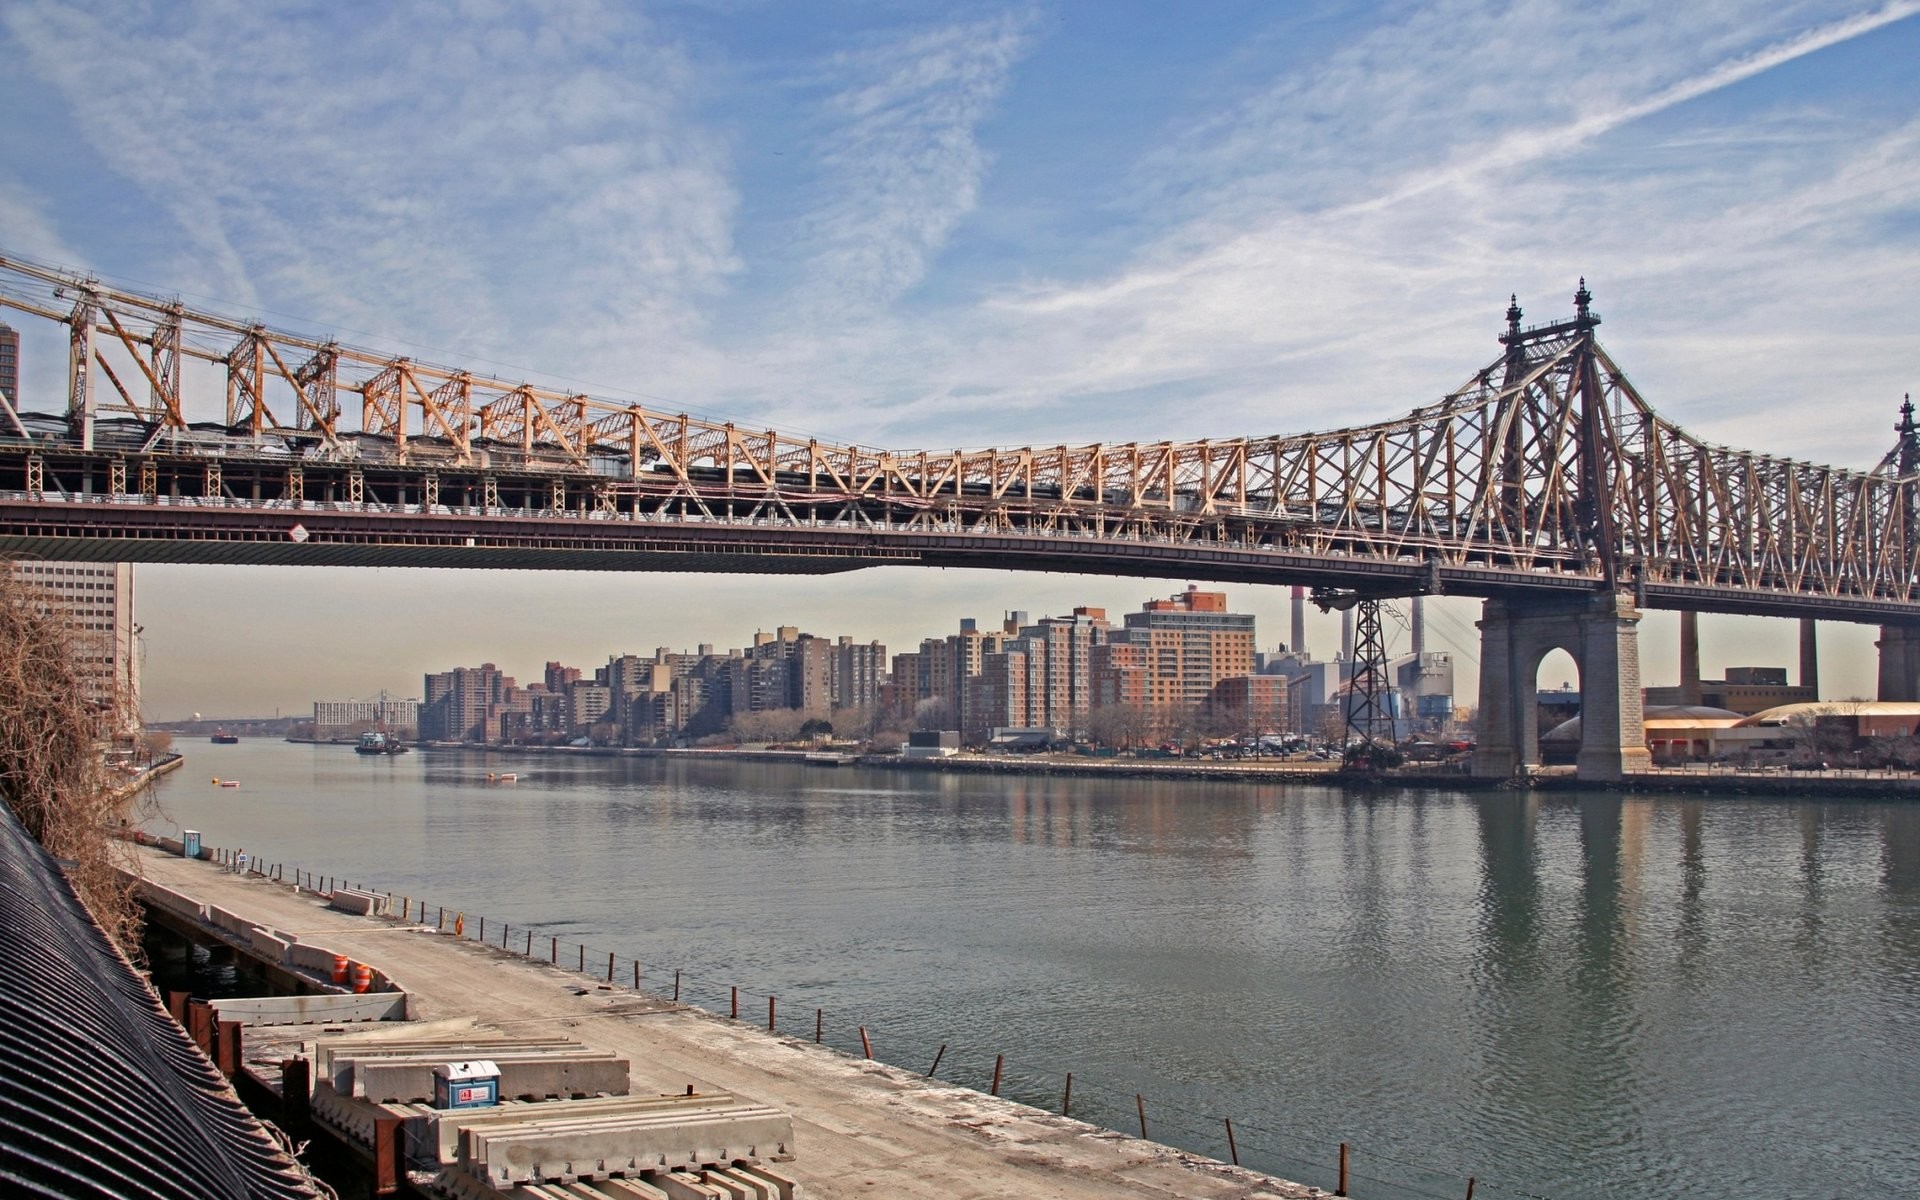 clouds, Cityscapes, Bridges, New, York, City, Industrial, Manhattan, Rivers, East, River Wallpaper